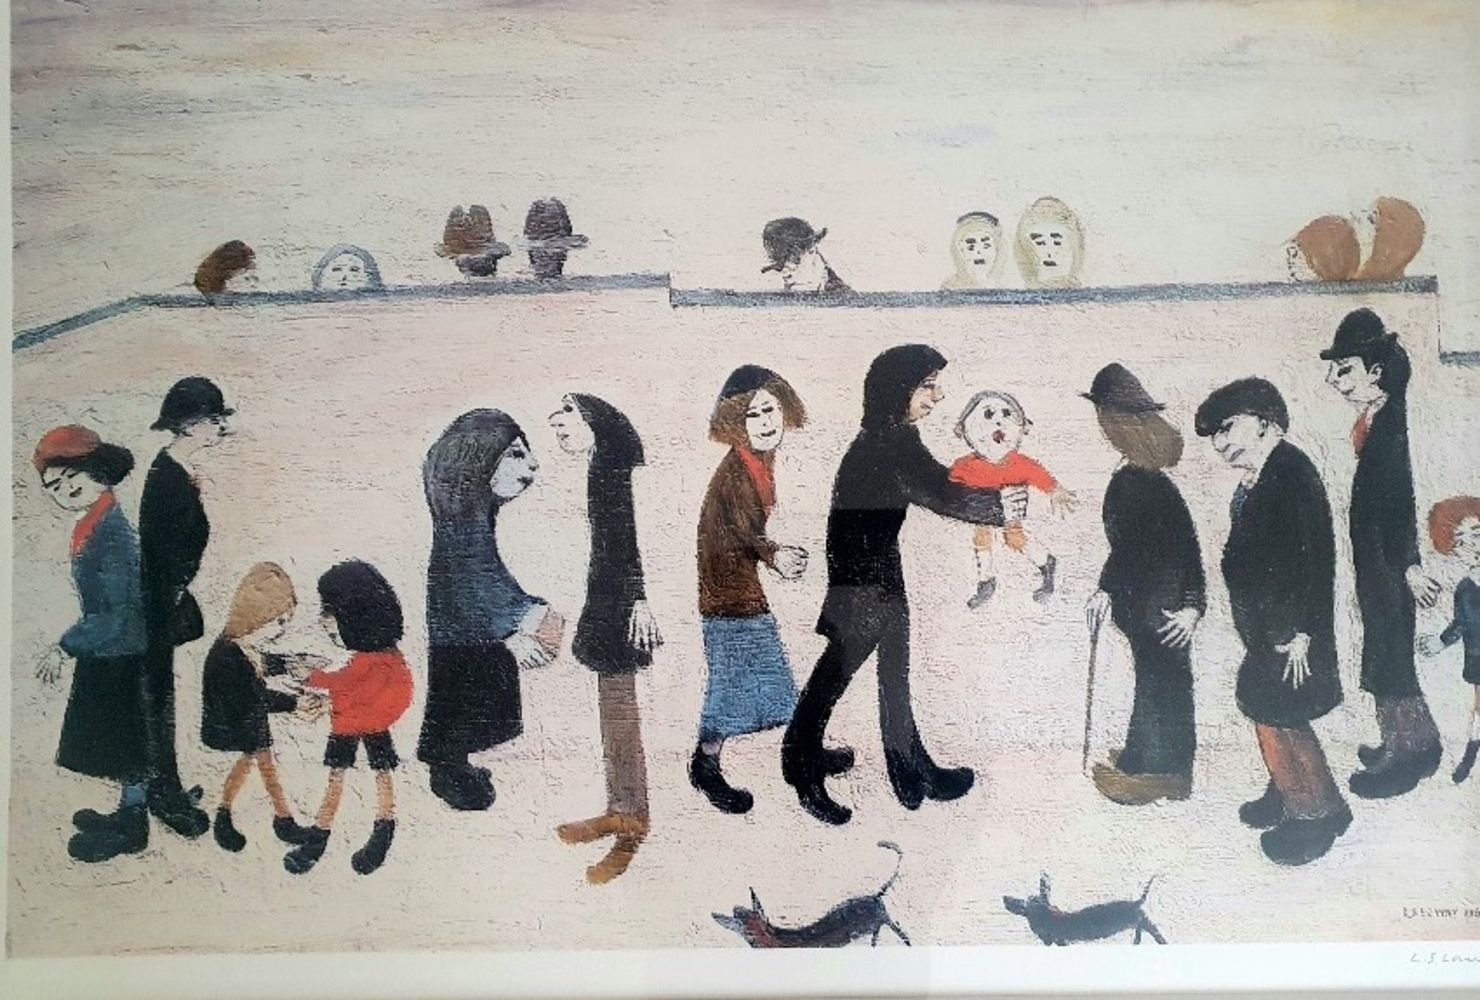 November Timed Auction to include Fabulous Signed Lowry Print, Norman Cornish Poster, Ercol, Gold and Jewellery